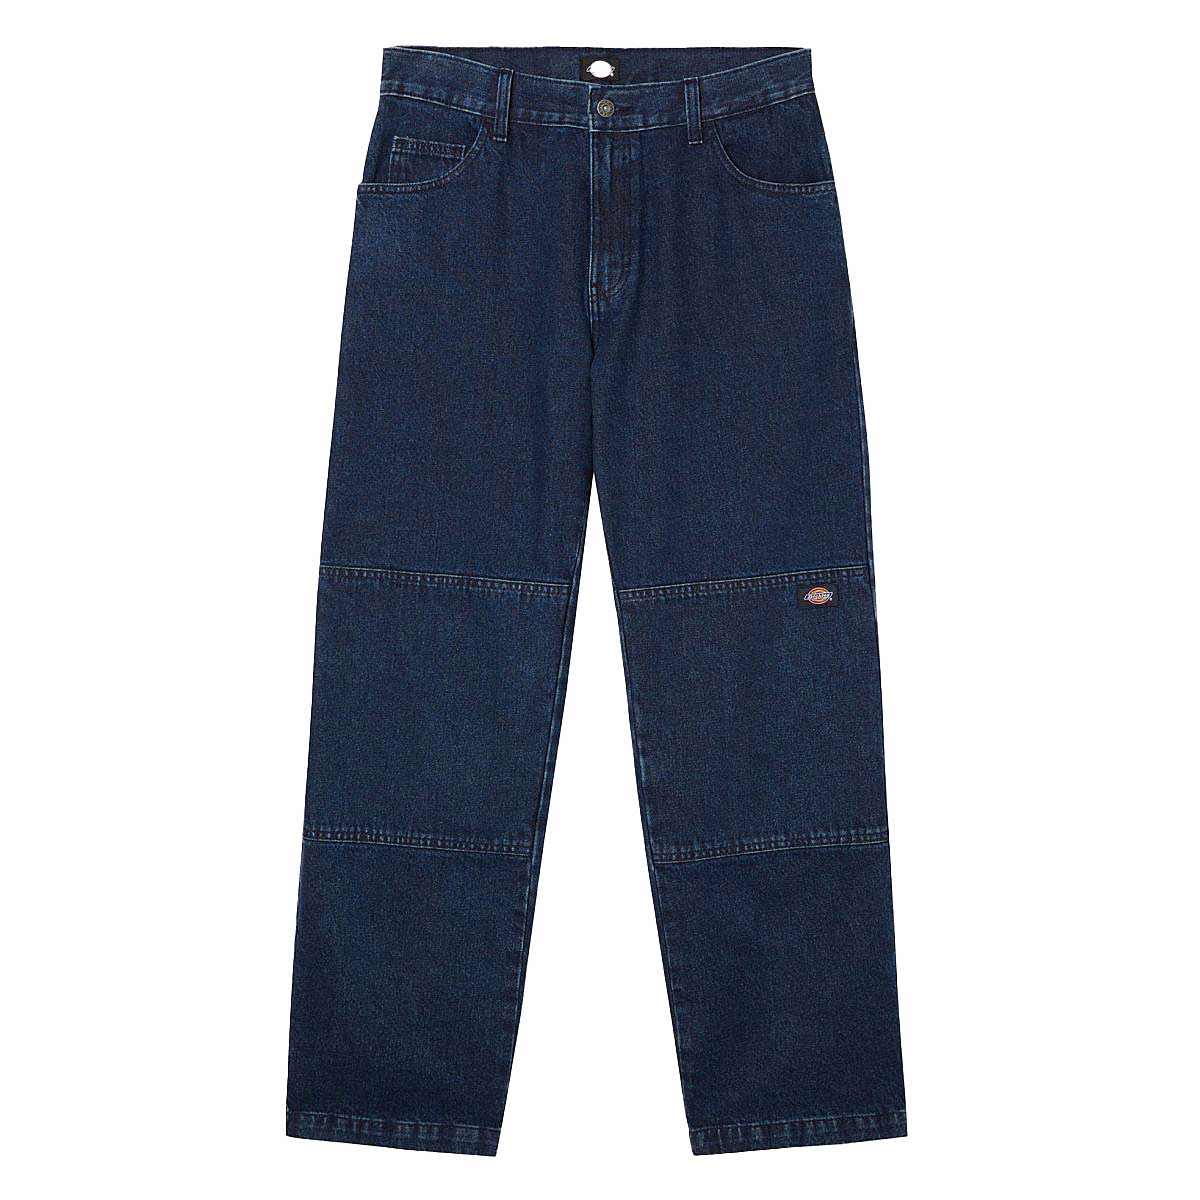 Image of Dickies Double Knee Denim Pant, Indigo, Male, Jeans, DK0A4Y3FIN01